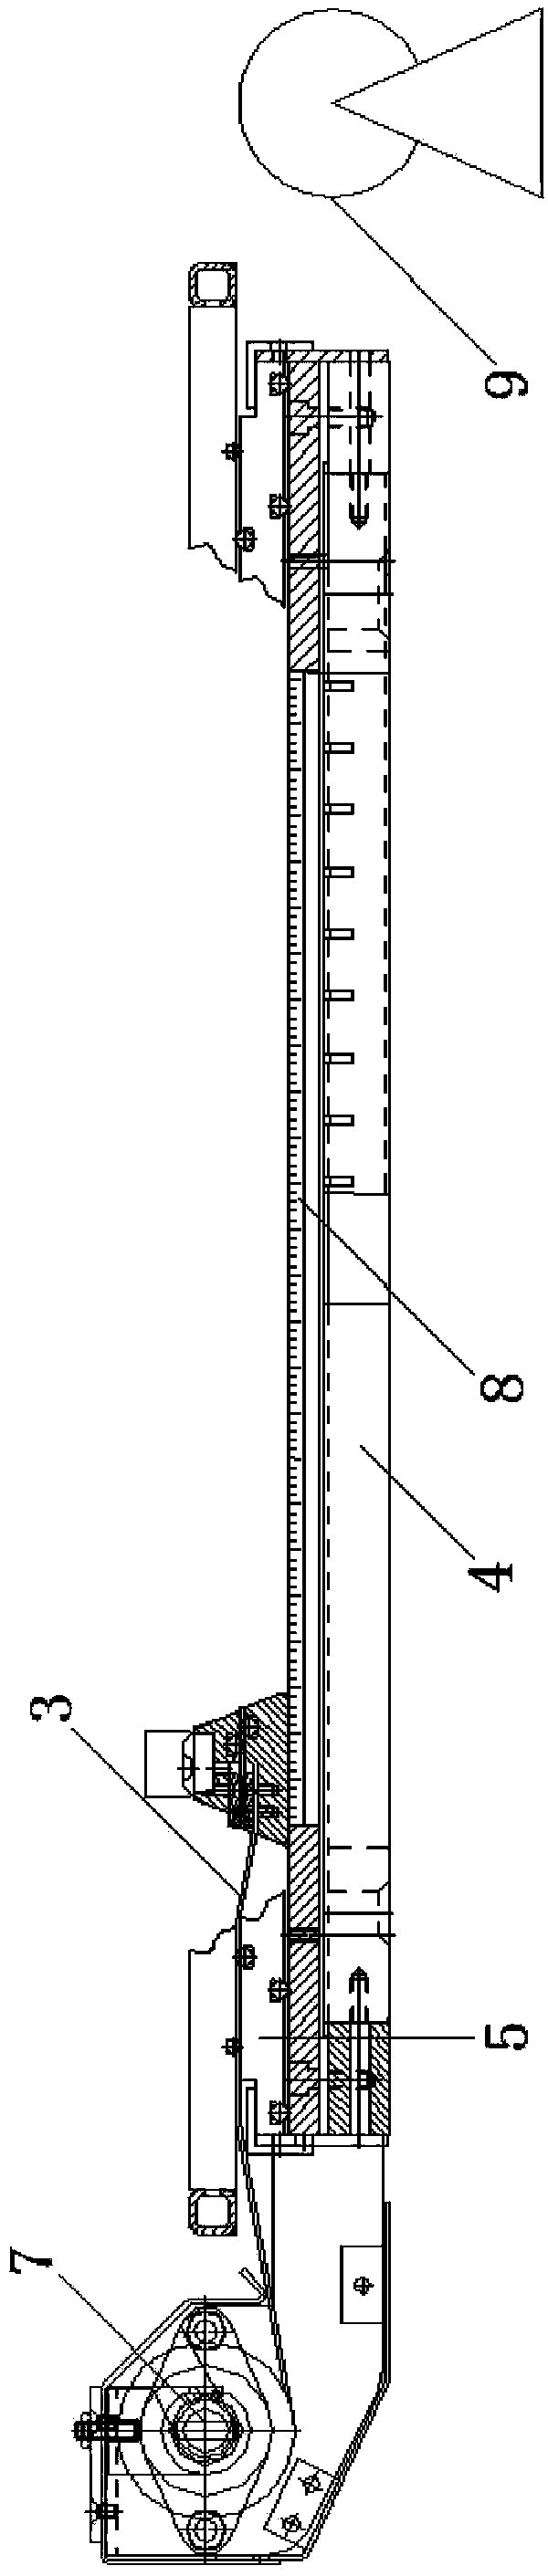 Parting and paving device